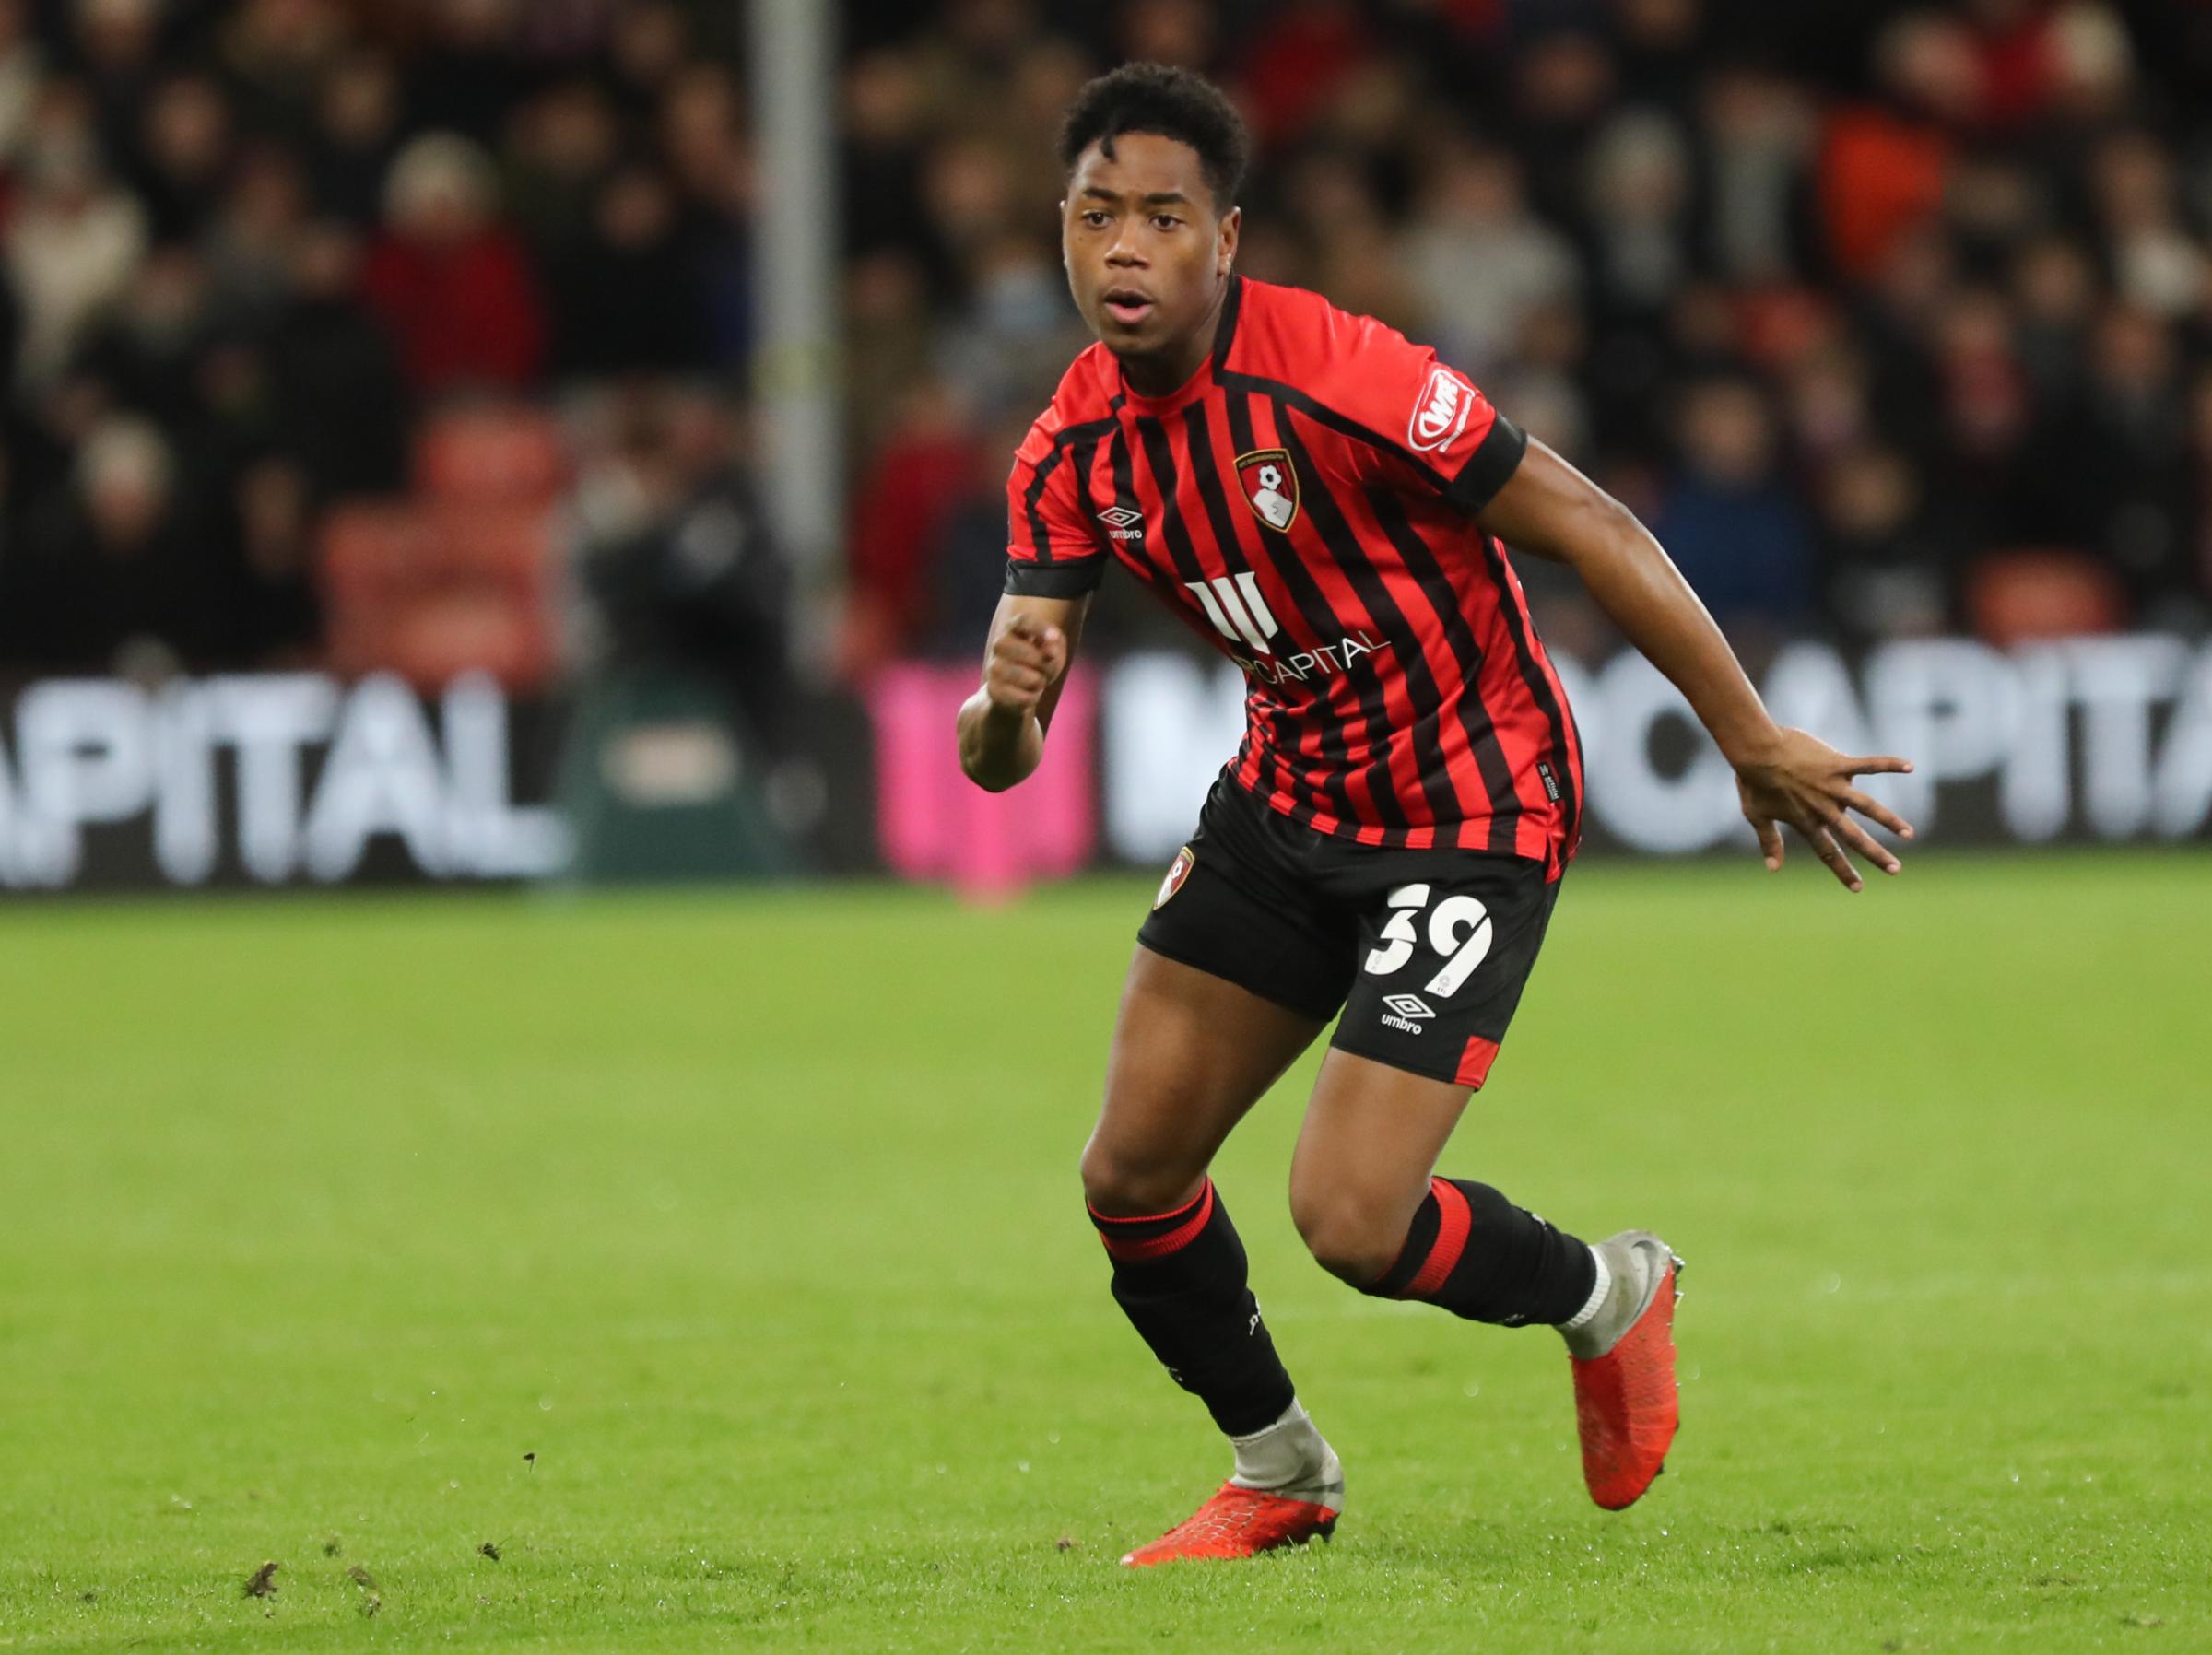 Moriah-Welsh nets first goal for Guyana, while Cherries duo compete in UEFA Nations League